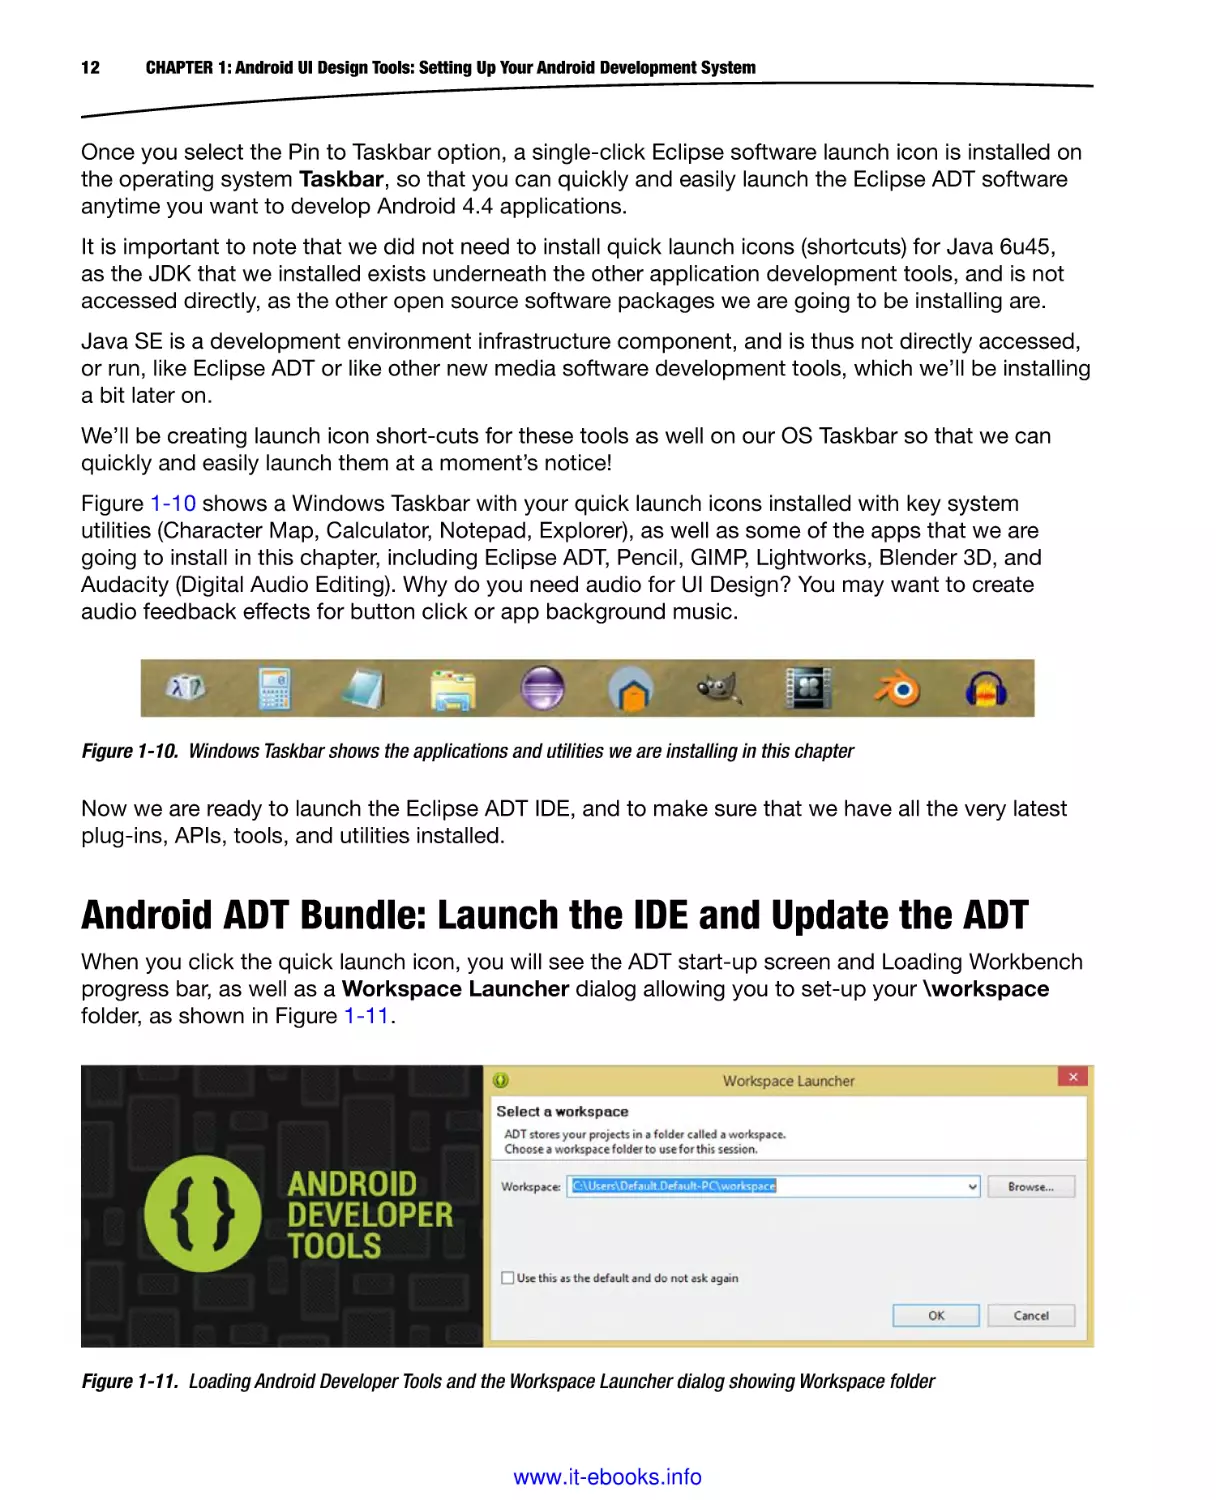 Android ADT Bundle